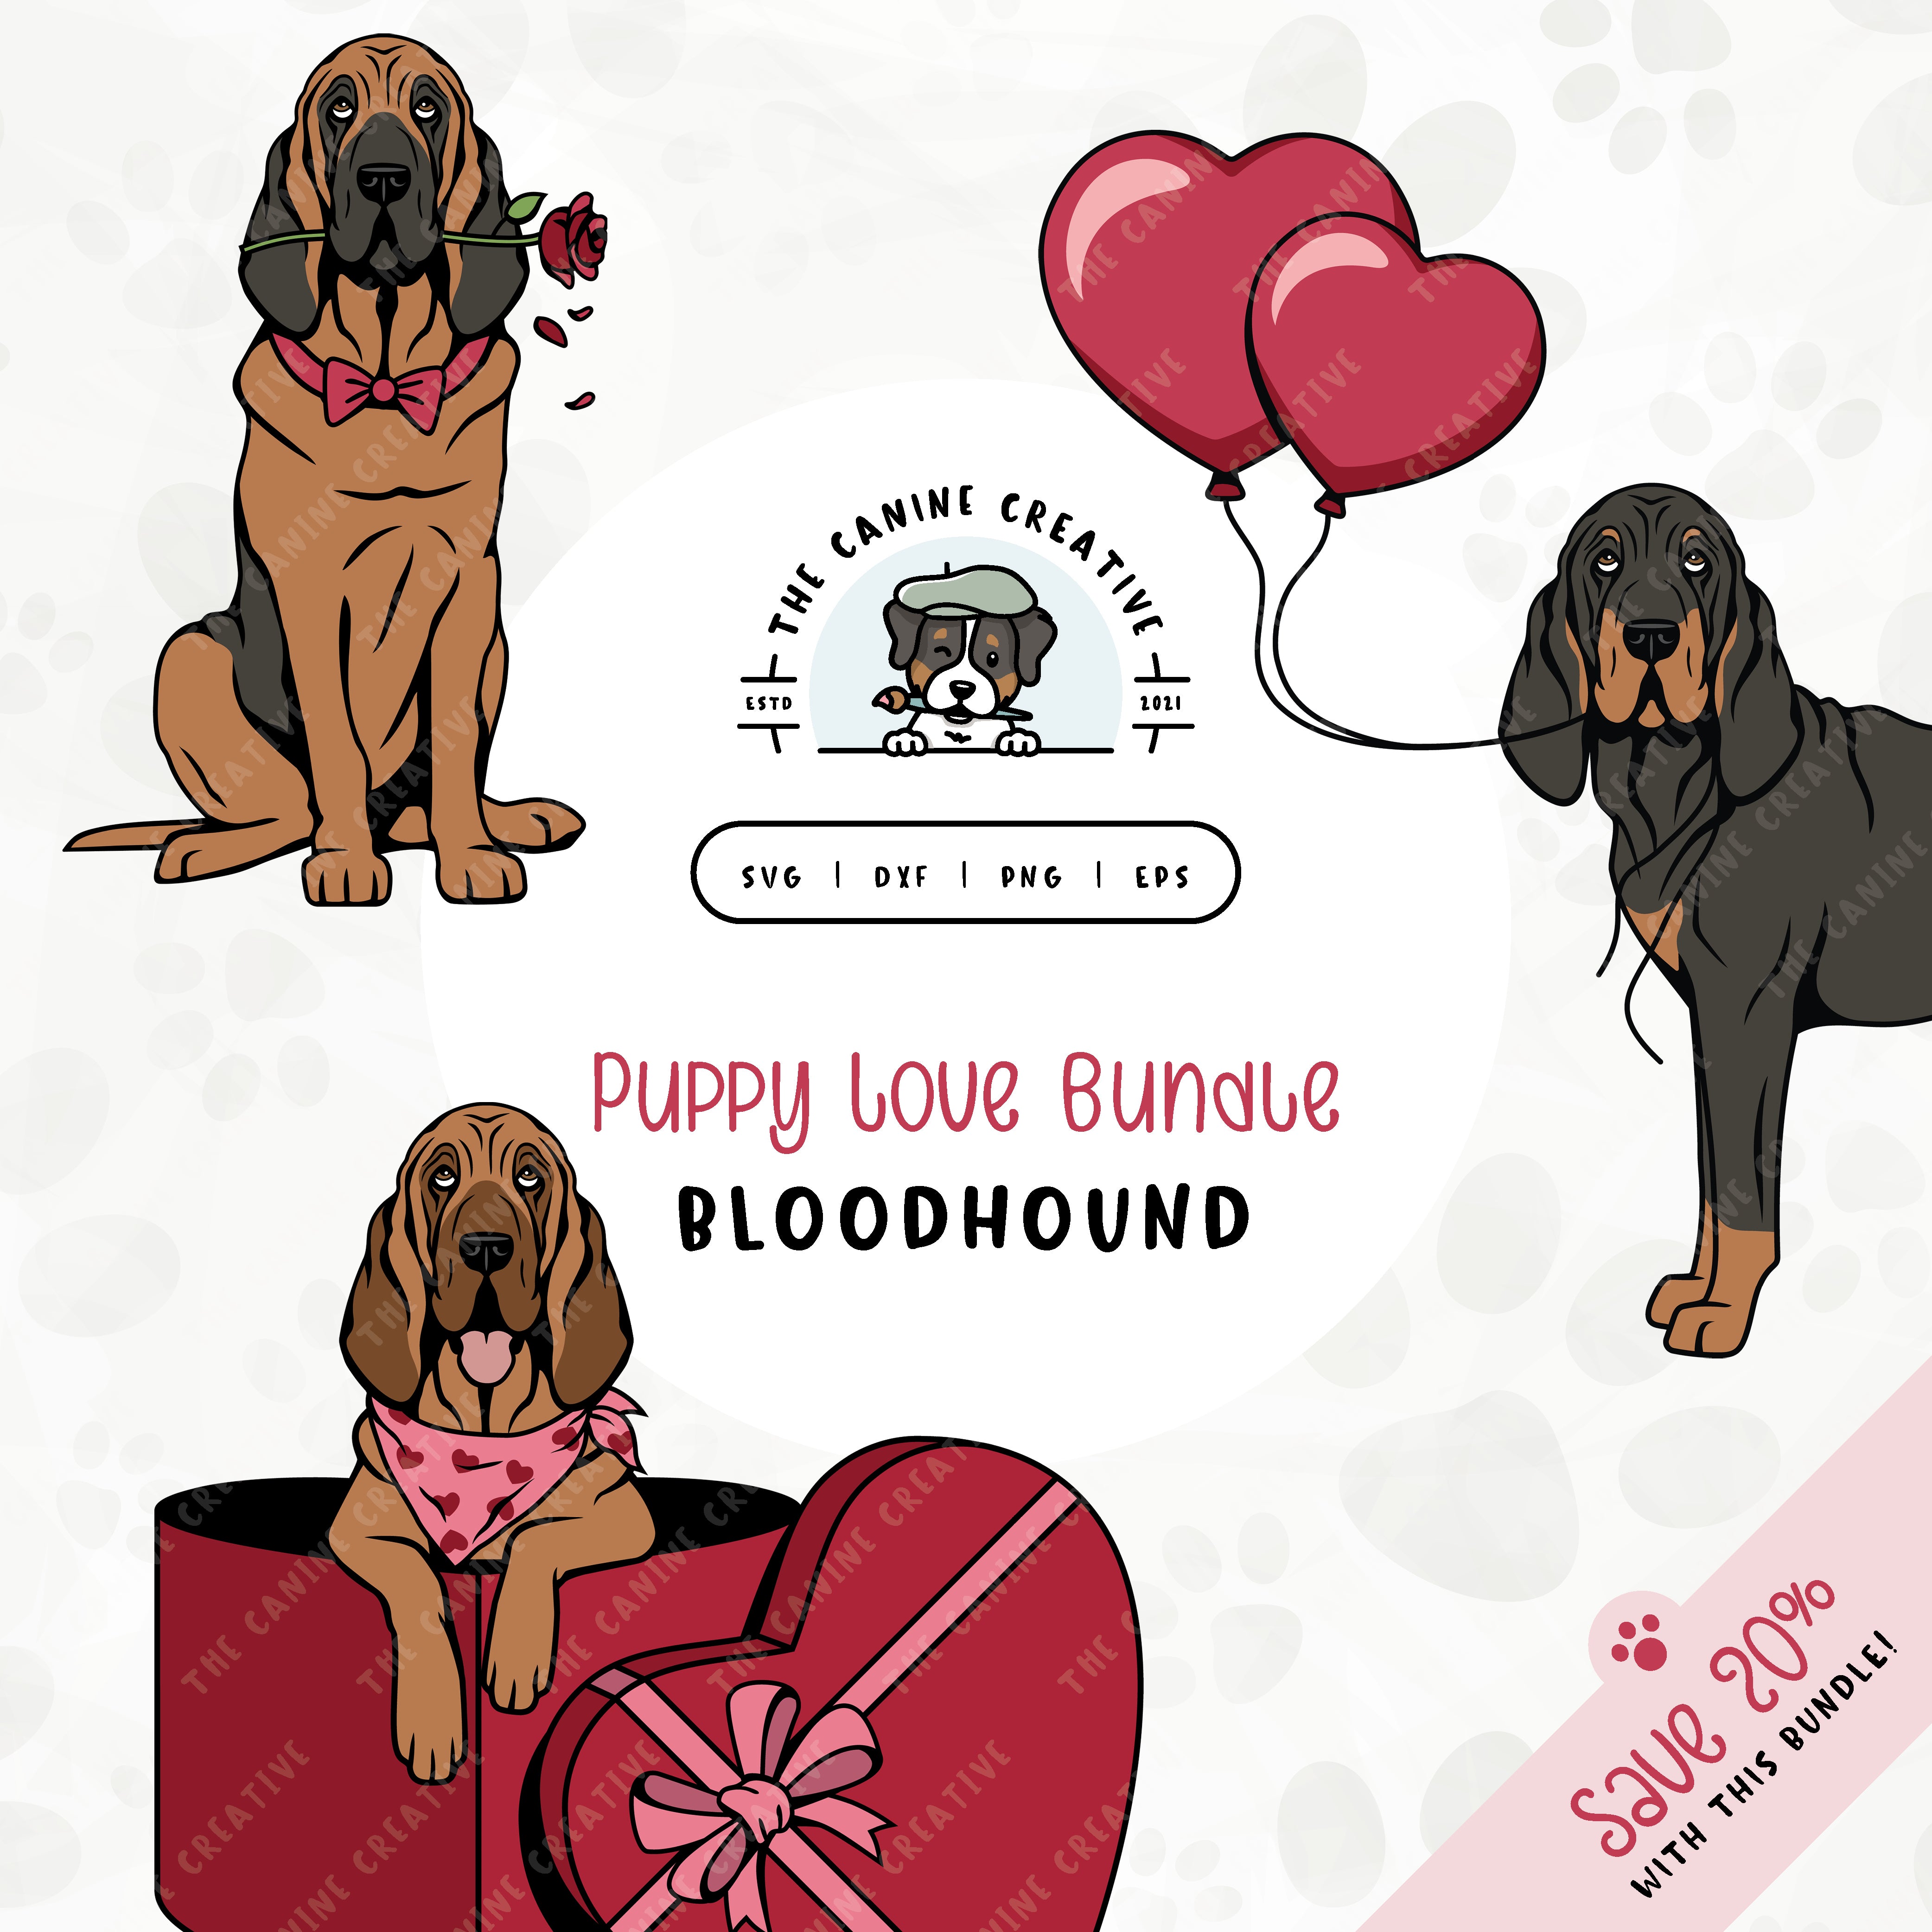 This 3-pack puppy love illustration bundle features Bloodhounds holding heart balloons, peeking out of a heart-shaped box, and holding a rose. File formats include: SVG, DXF, PNG, and EPS.